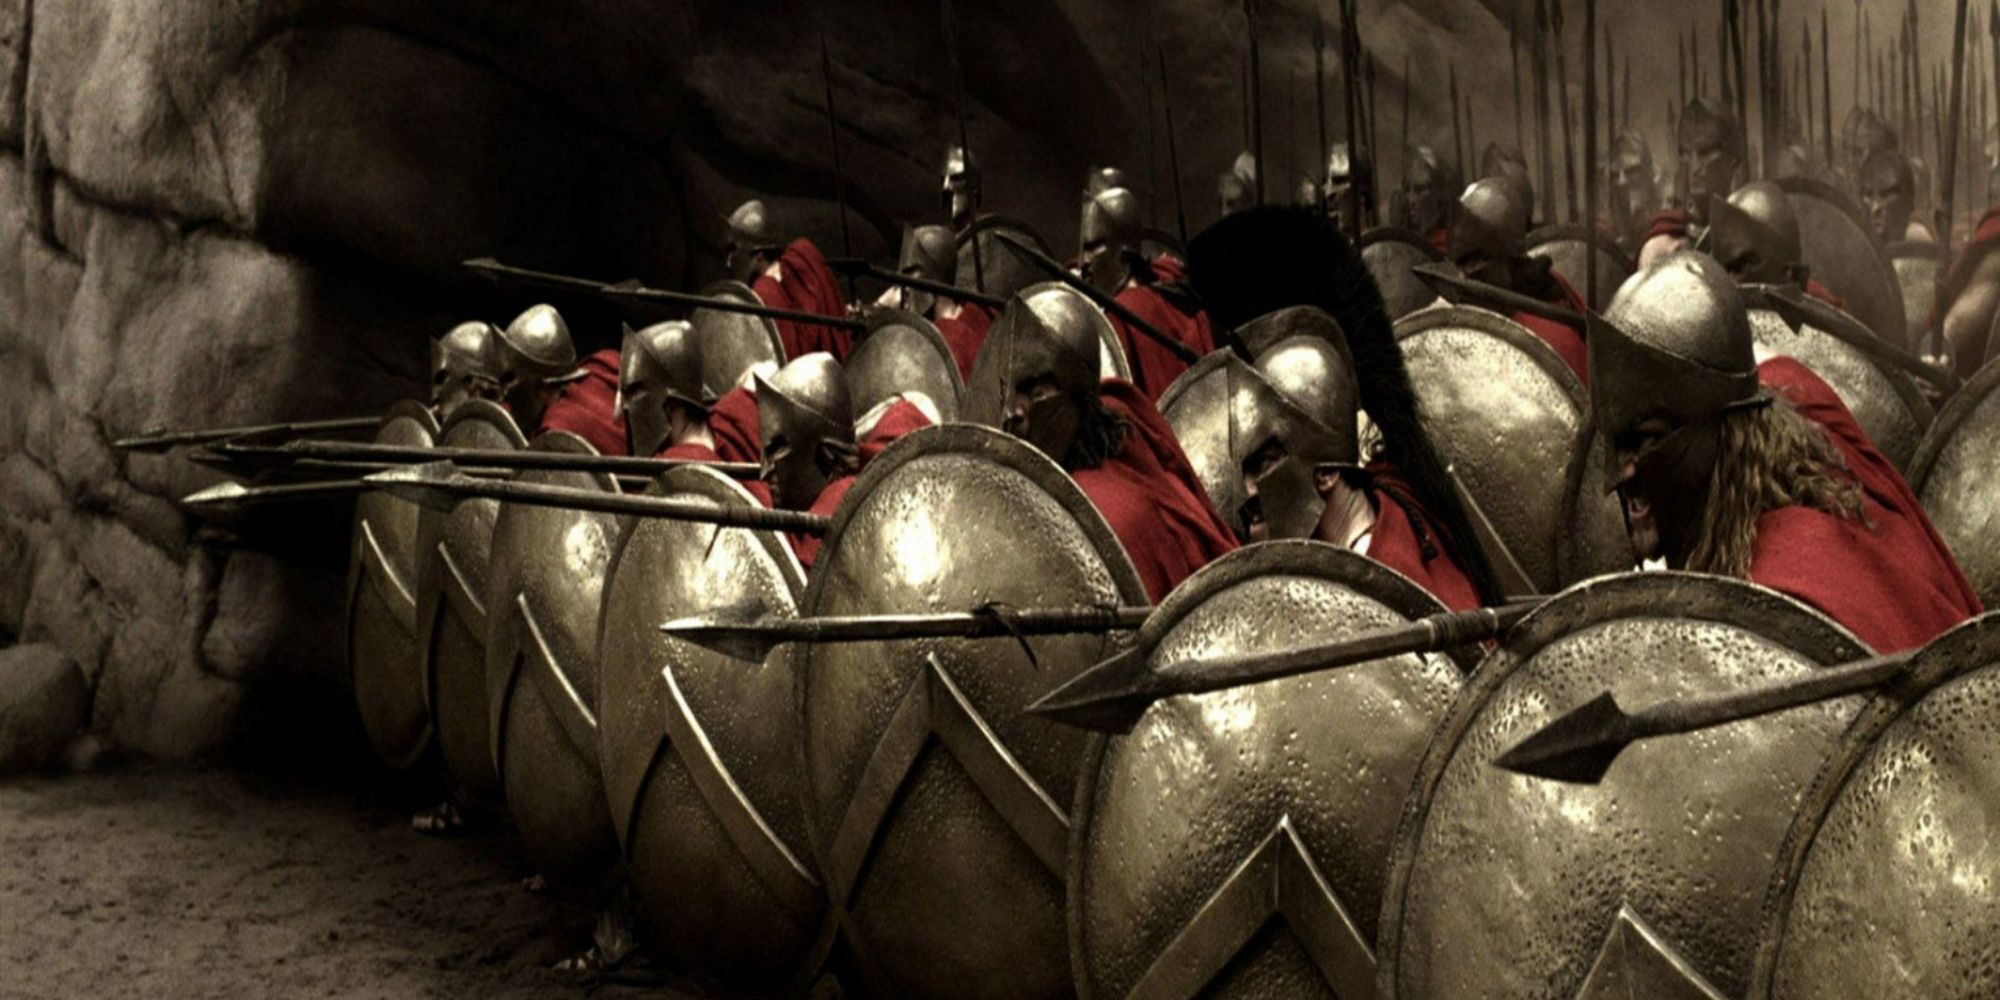 The Spartans pointing their spears in 300.